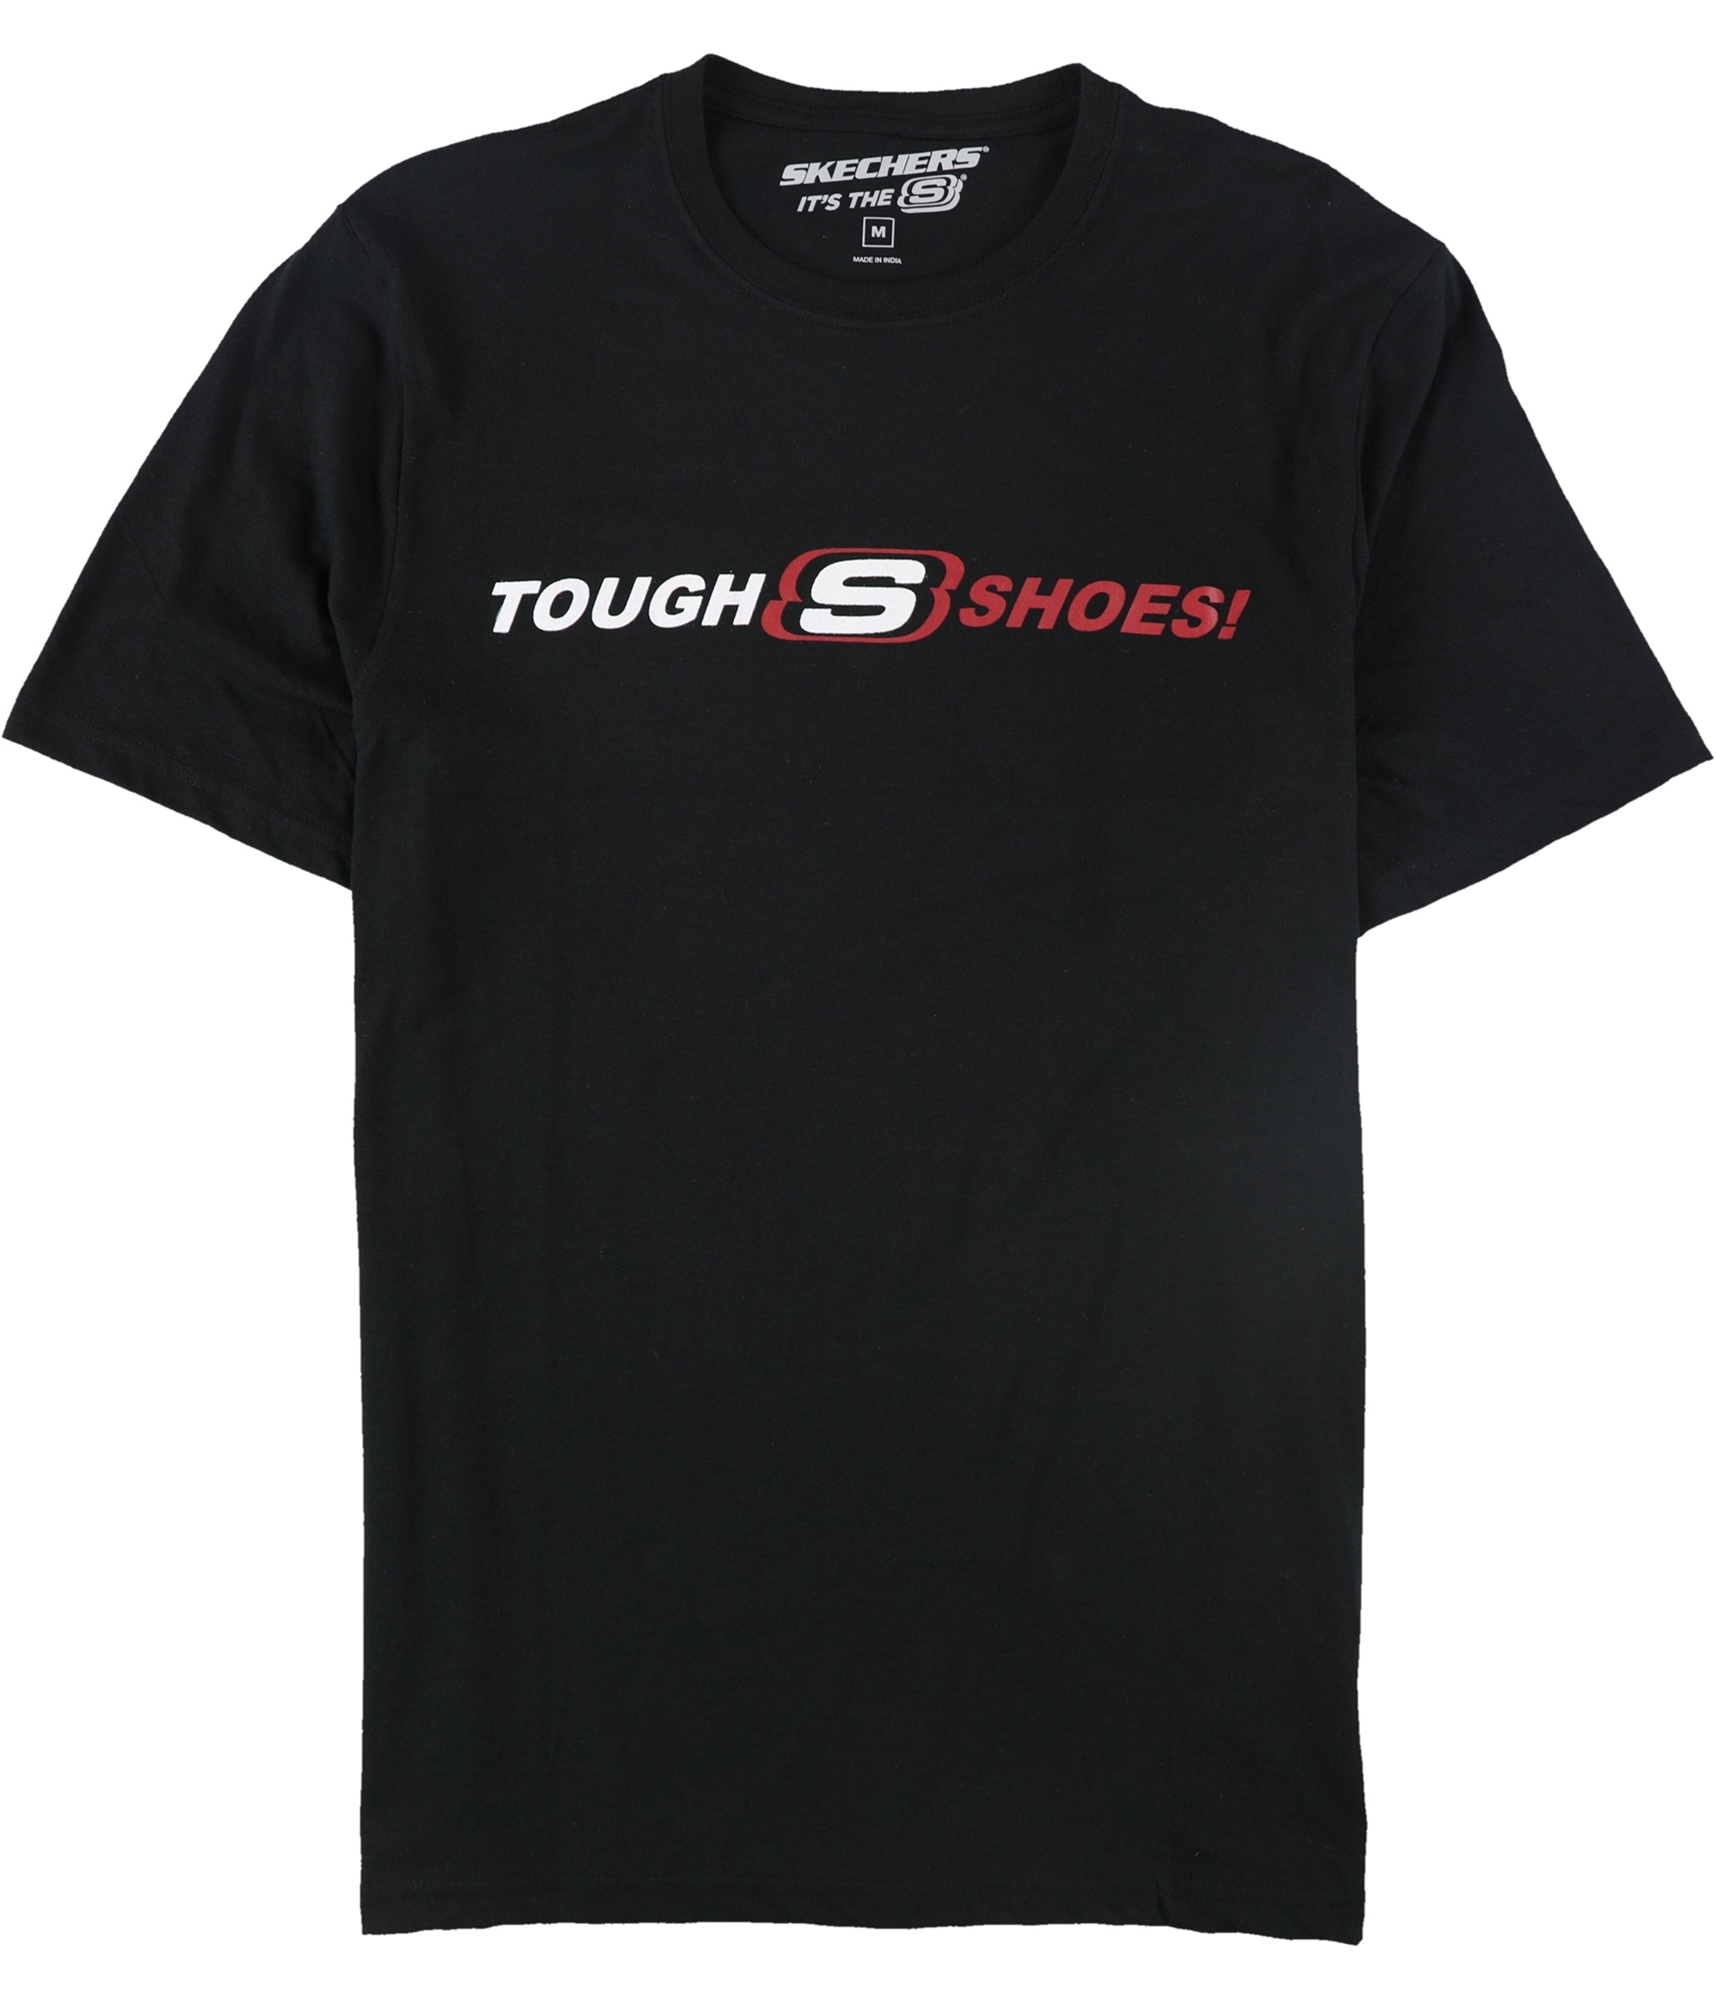 Tough Tagsweekly Skechers Mens Buy Shoes! a | Graphic T-Shirt